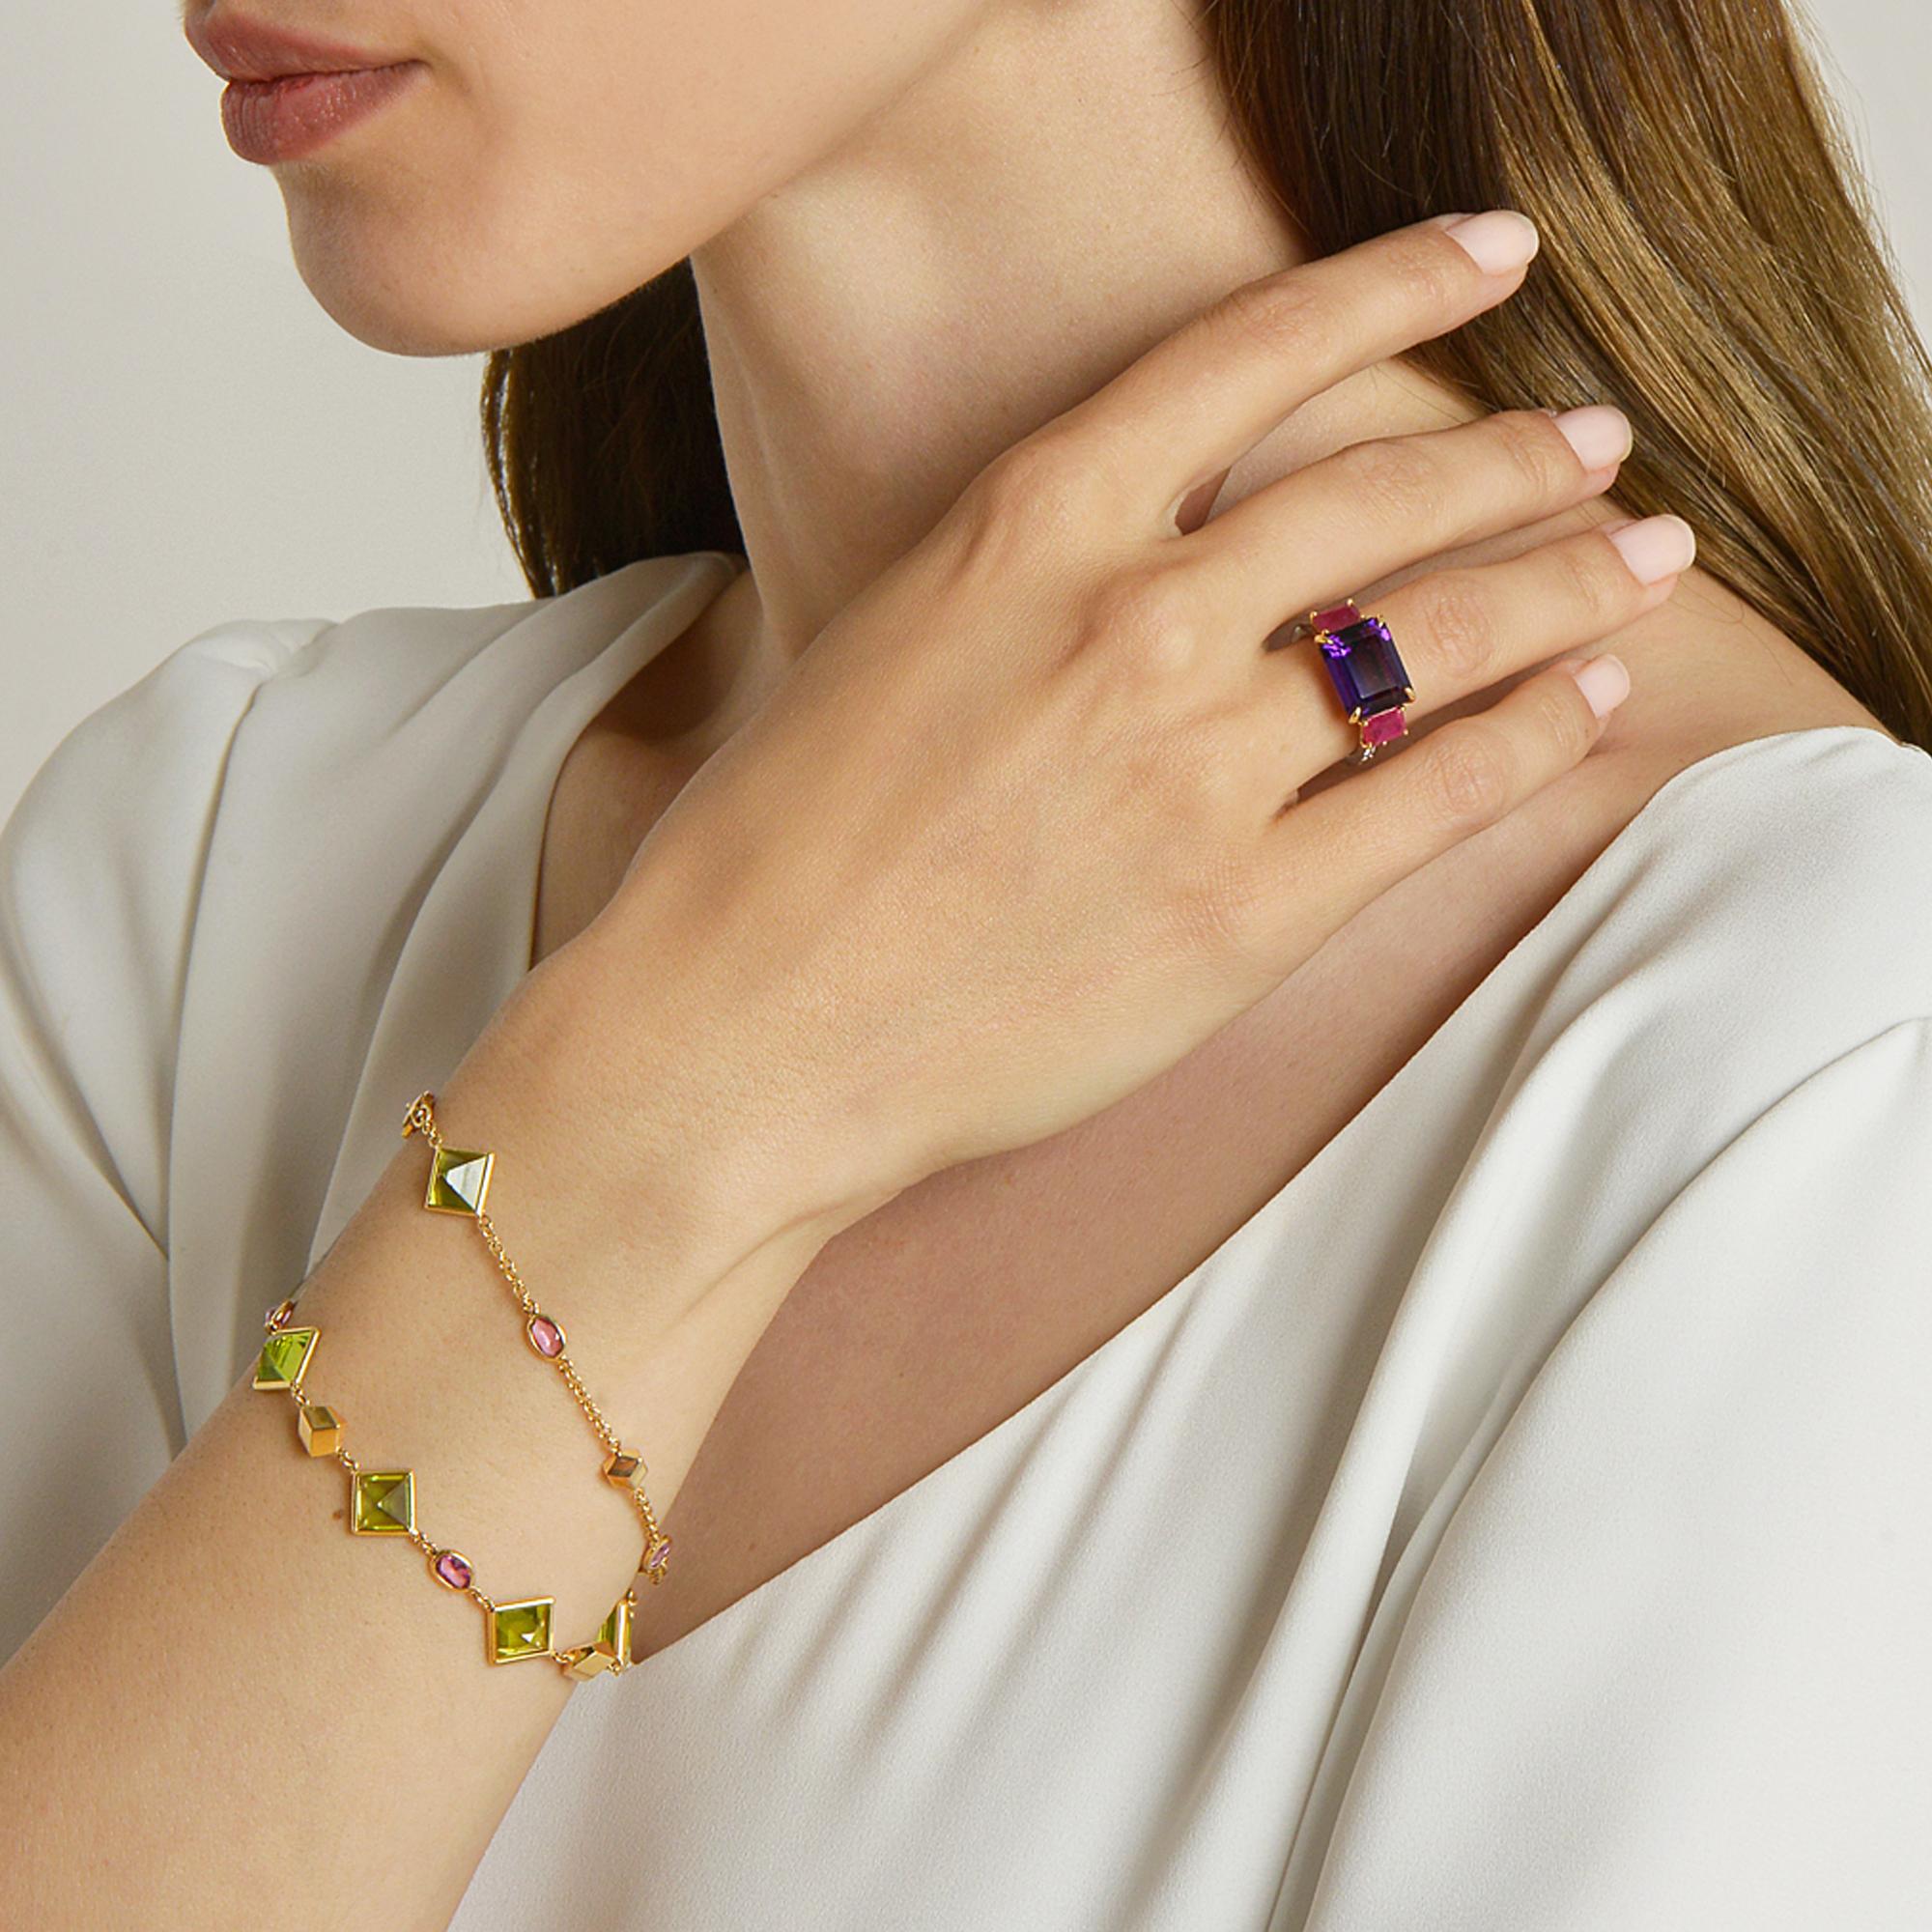 18kt yellow gold Florentine station bracelet with bezel set emerald-cut peridot and oval pink sapphires, and signature Brillante® motif.

Inspired by the Garden of the Iris, the Florentine collection pairs bold color combinations of geometric